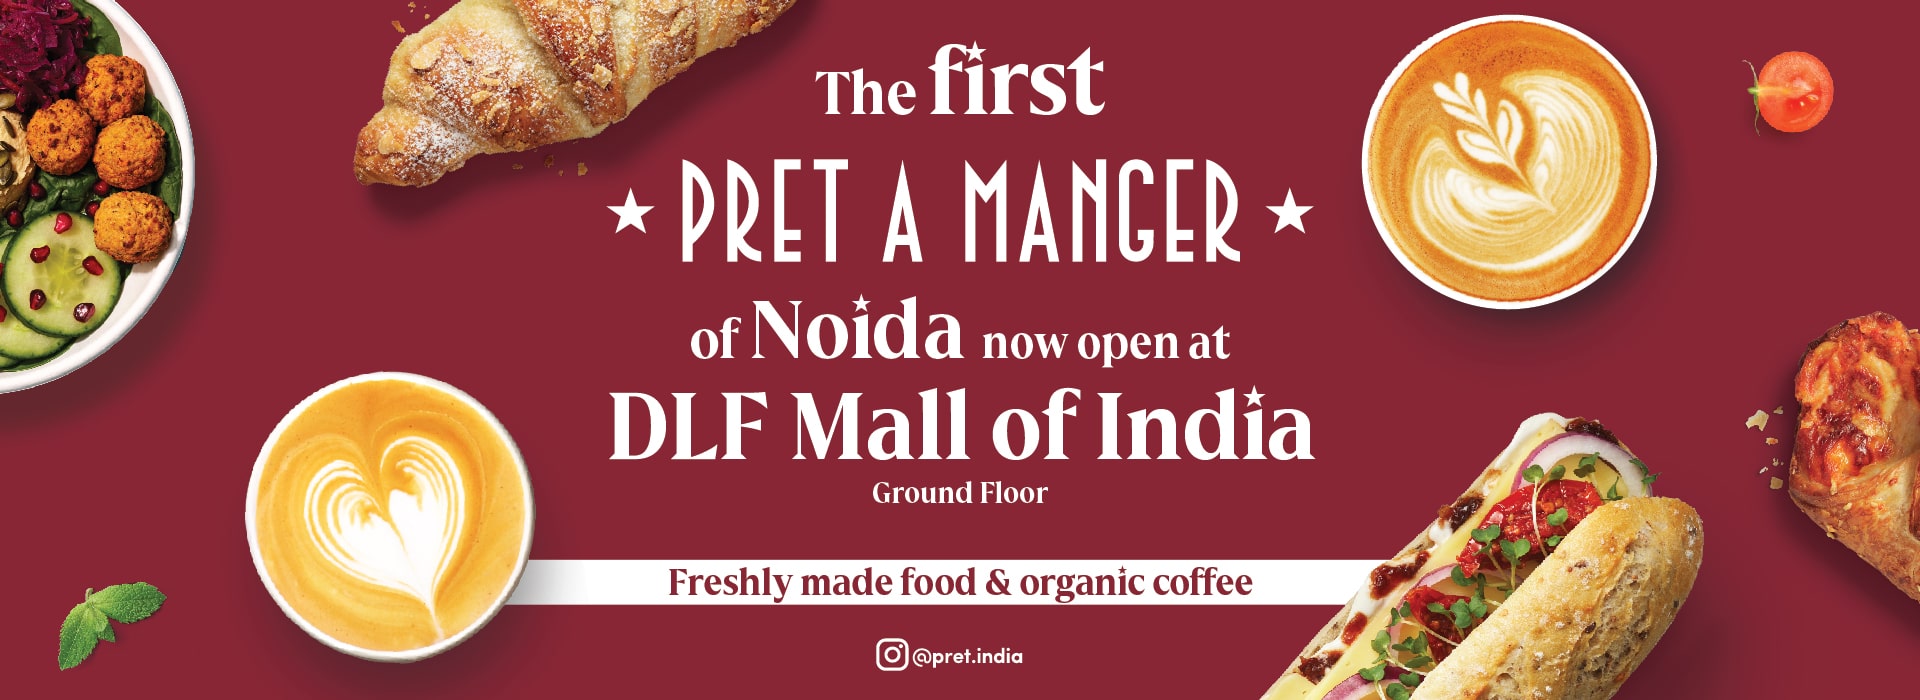 mall of india banner